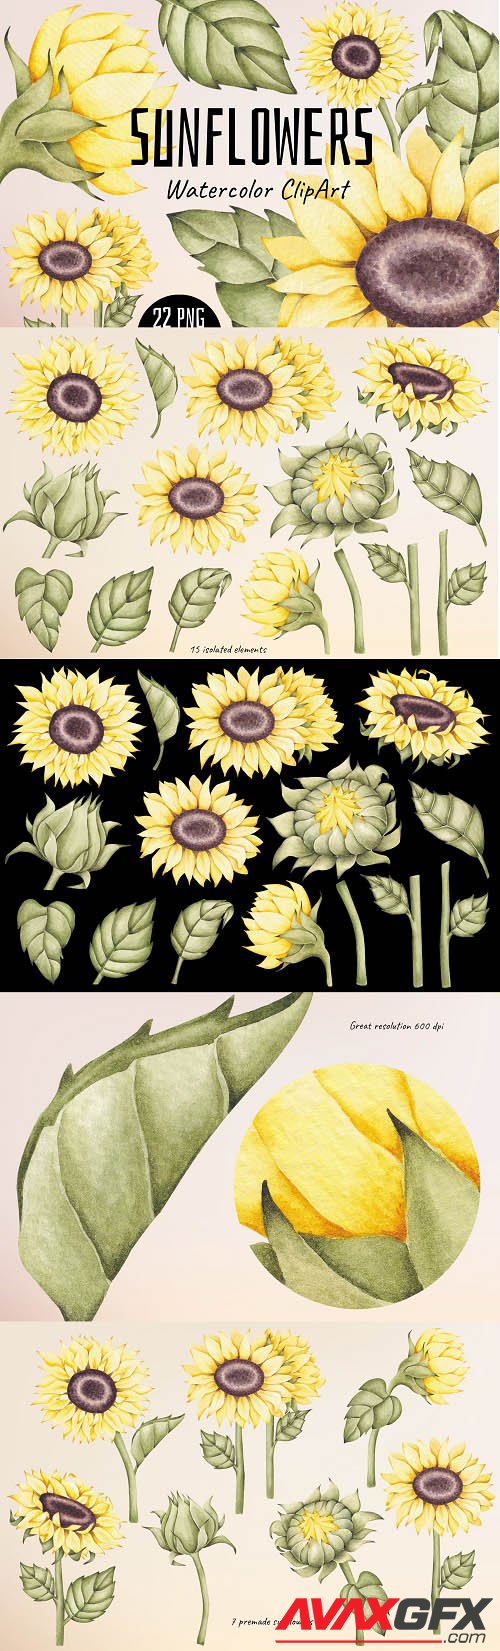 Watercolor ClipArt Sunflowers - 1436254